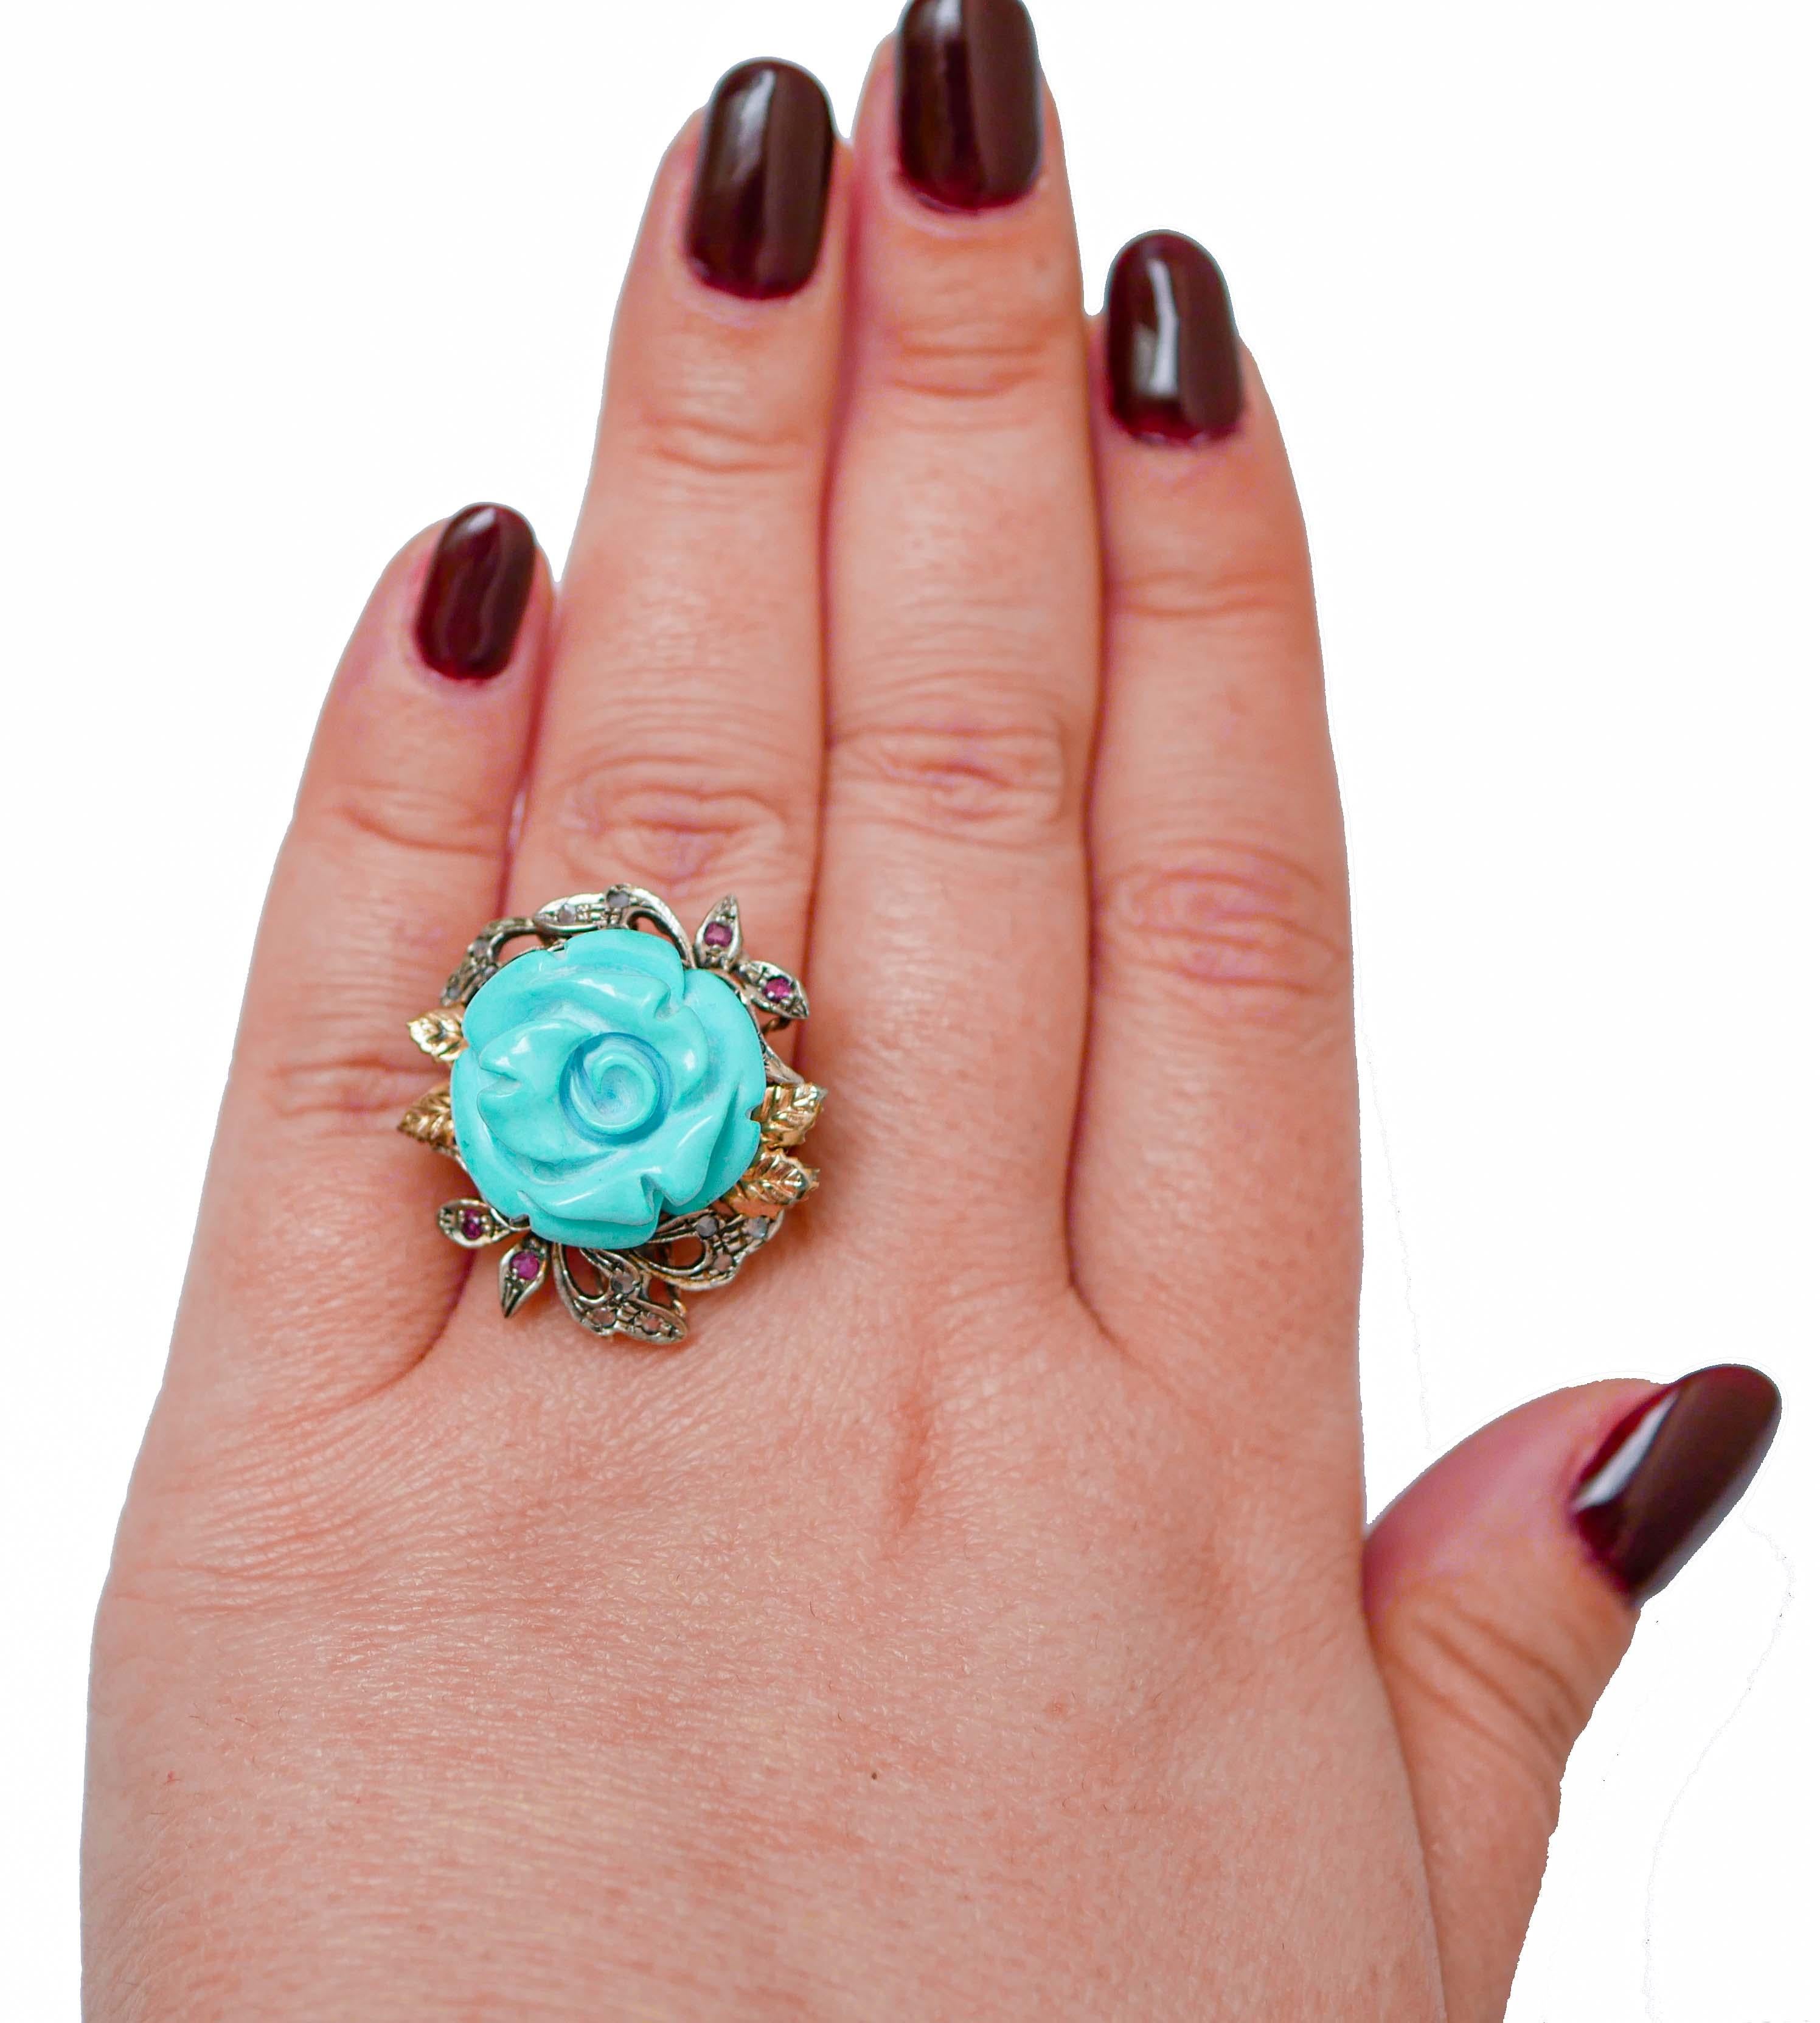 Mixed Cut Turquoise, Rubies, Diamonds, Rose Gold and Silver Ring. For Sale